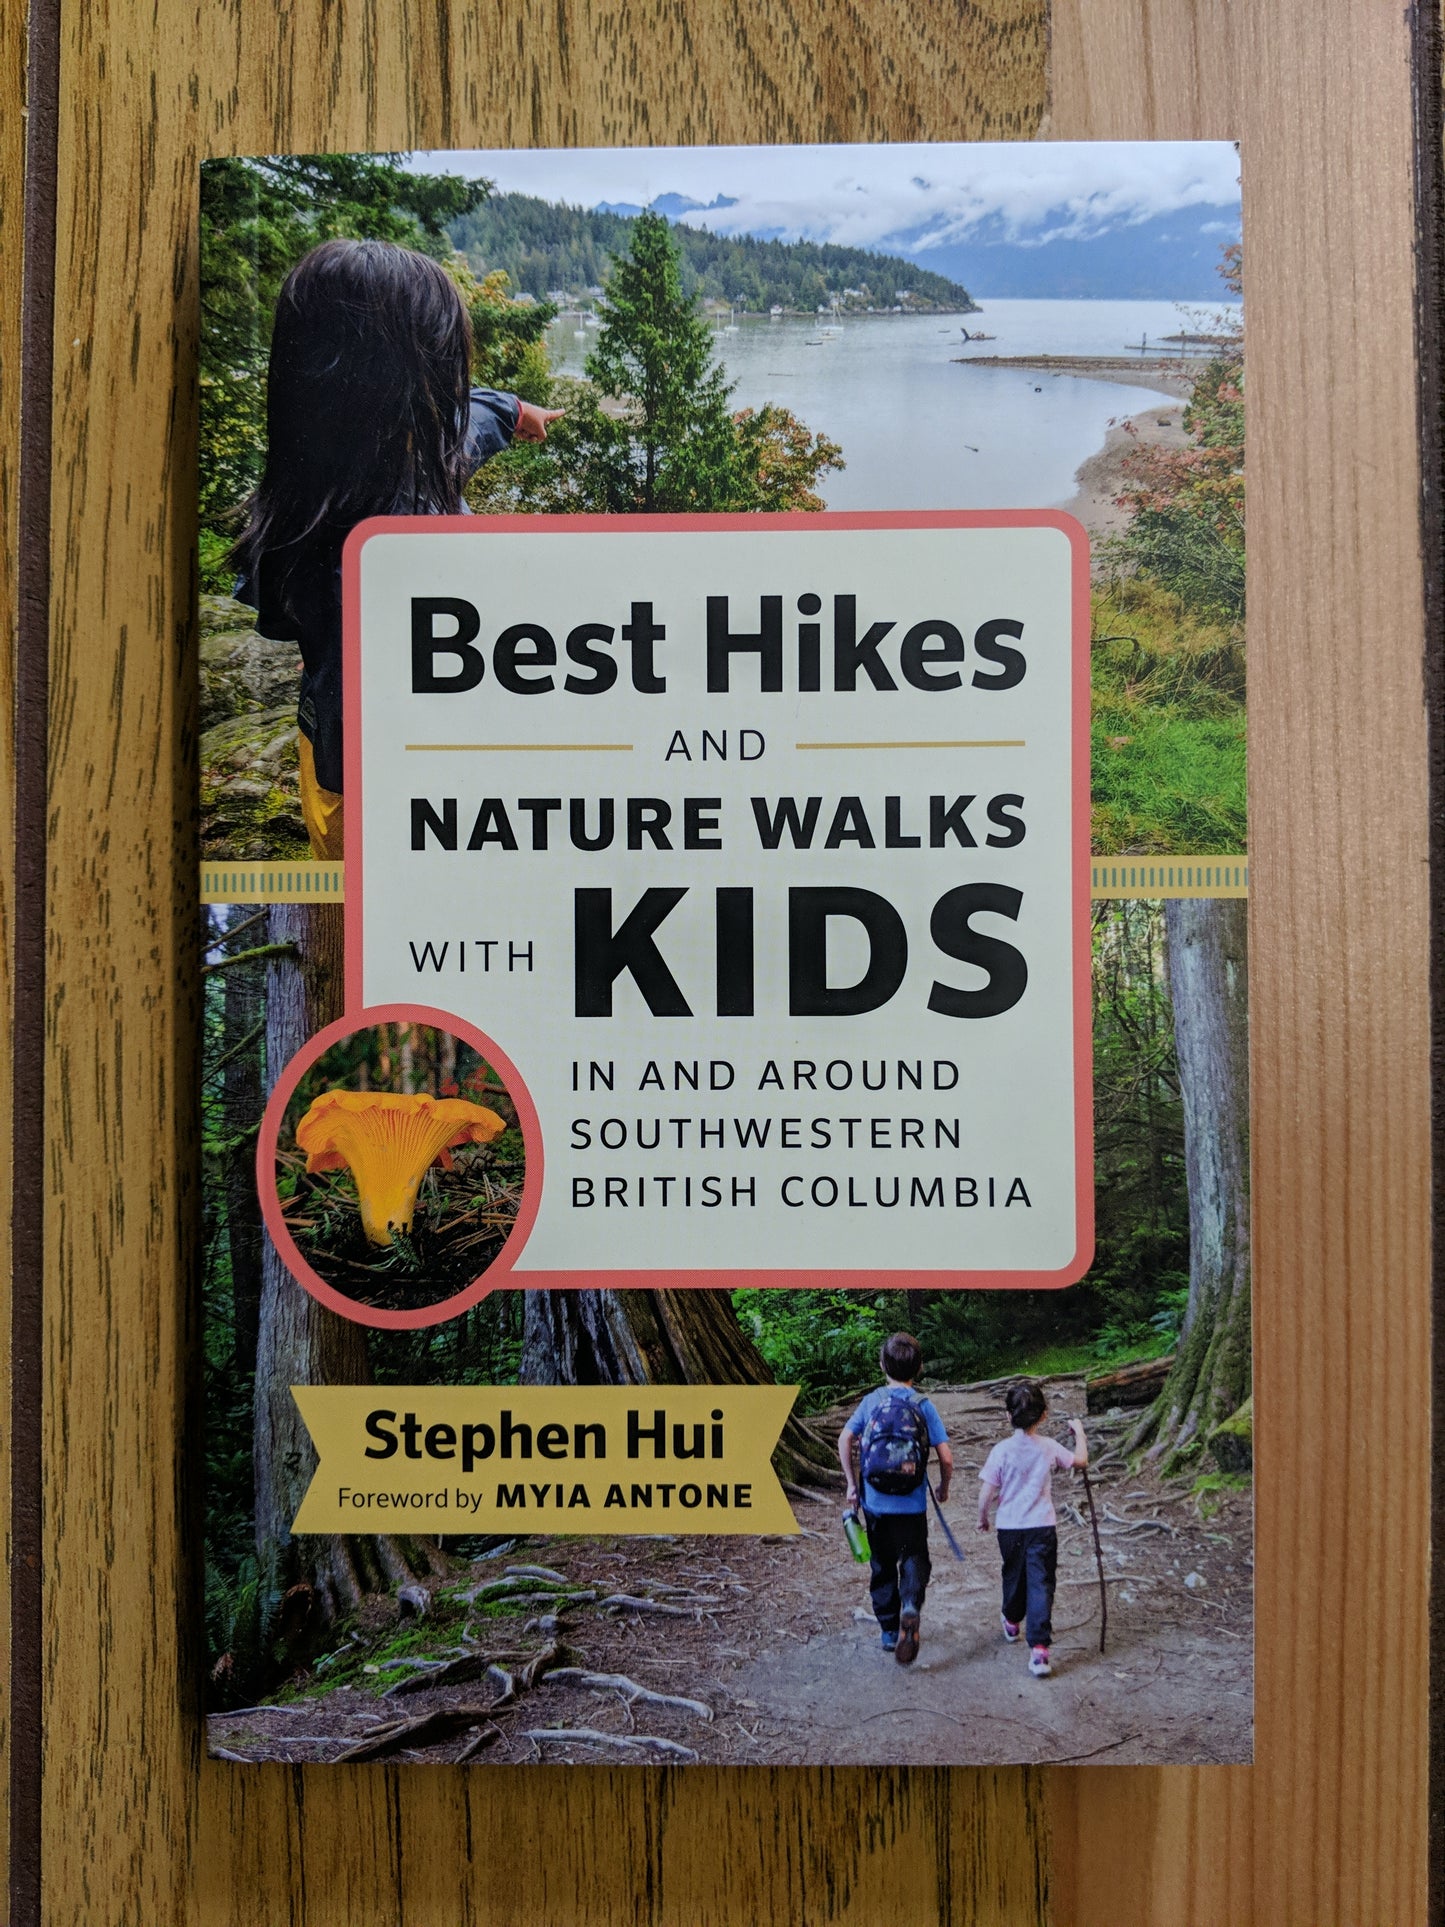 Best Hikes and Nature Walks With Kids